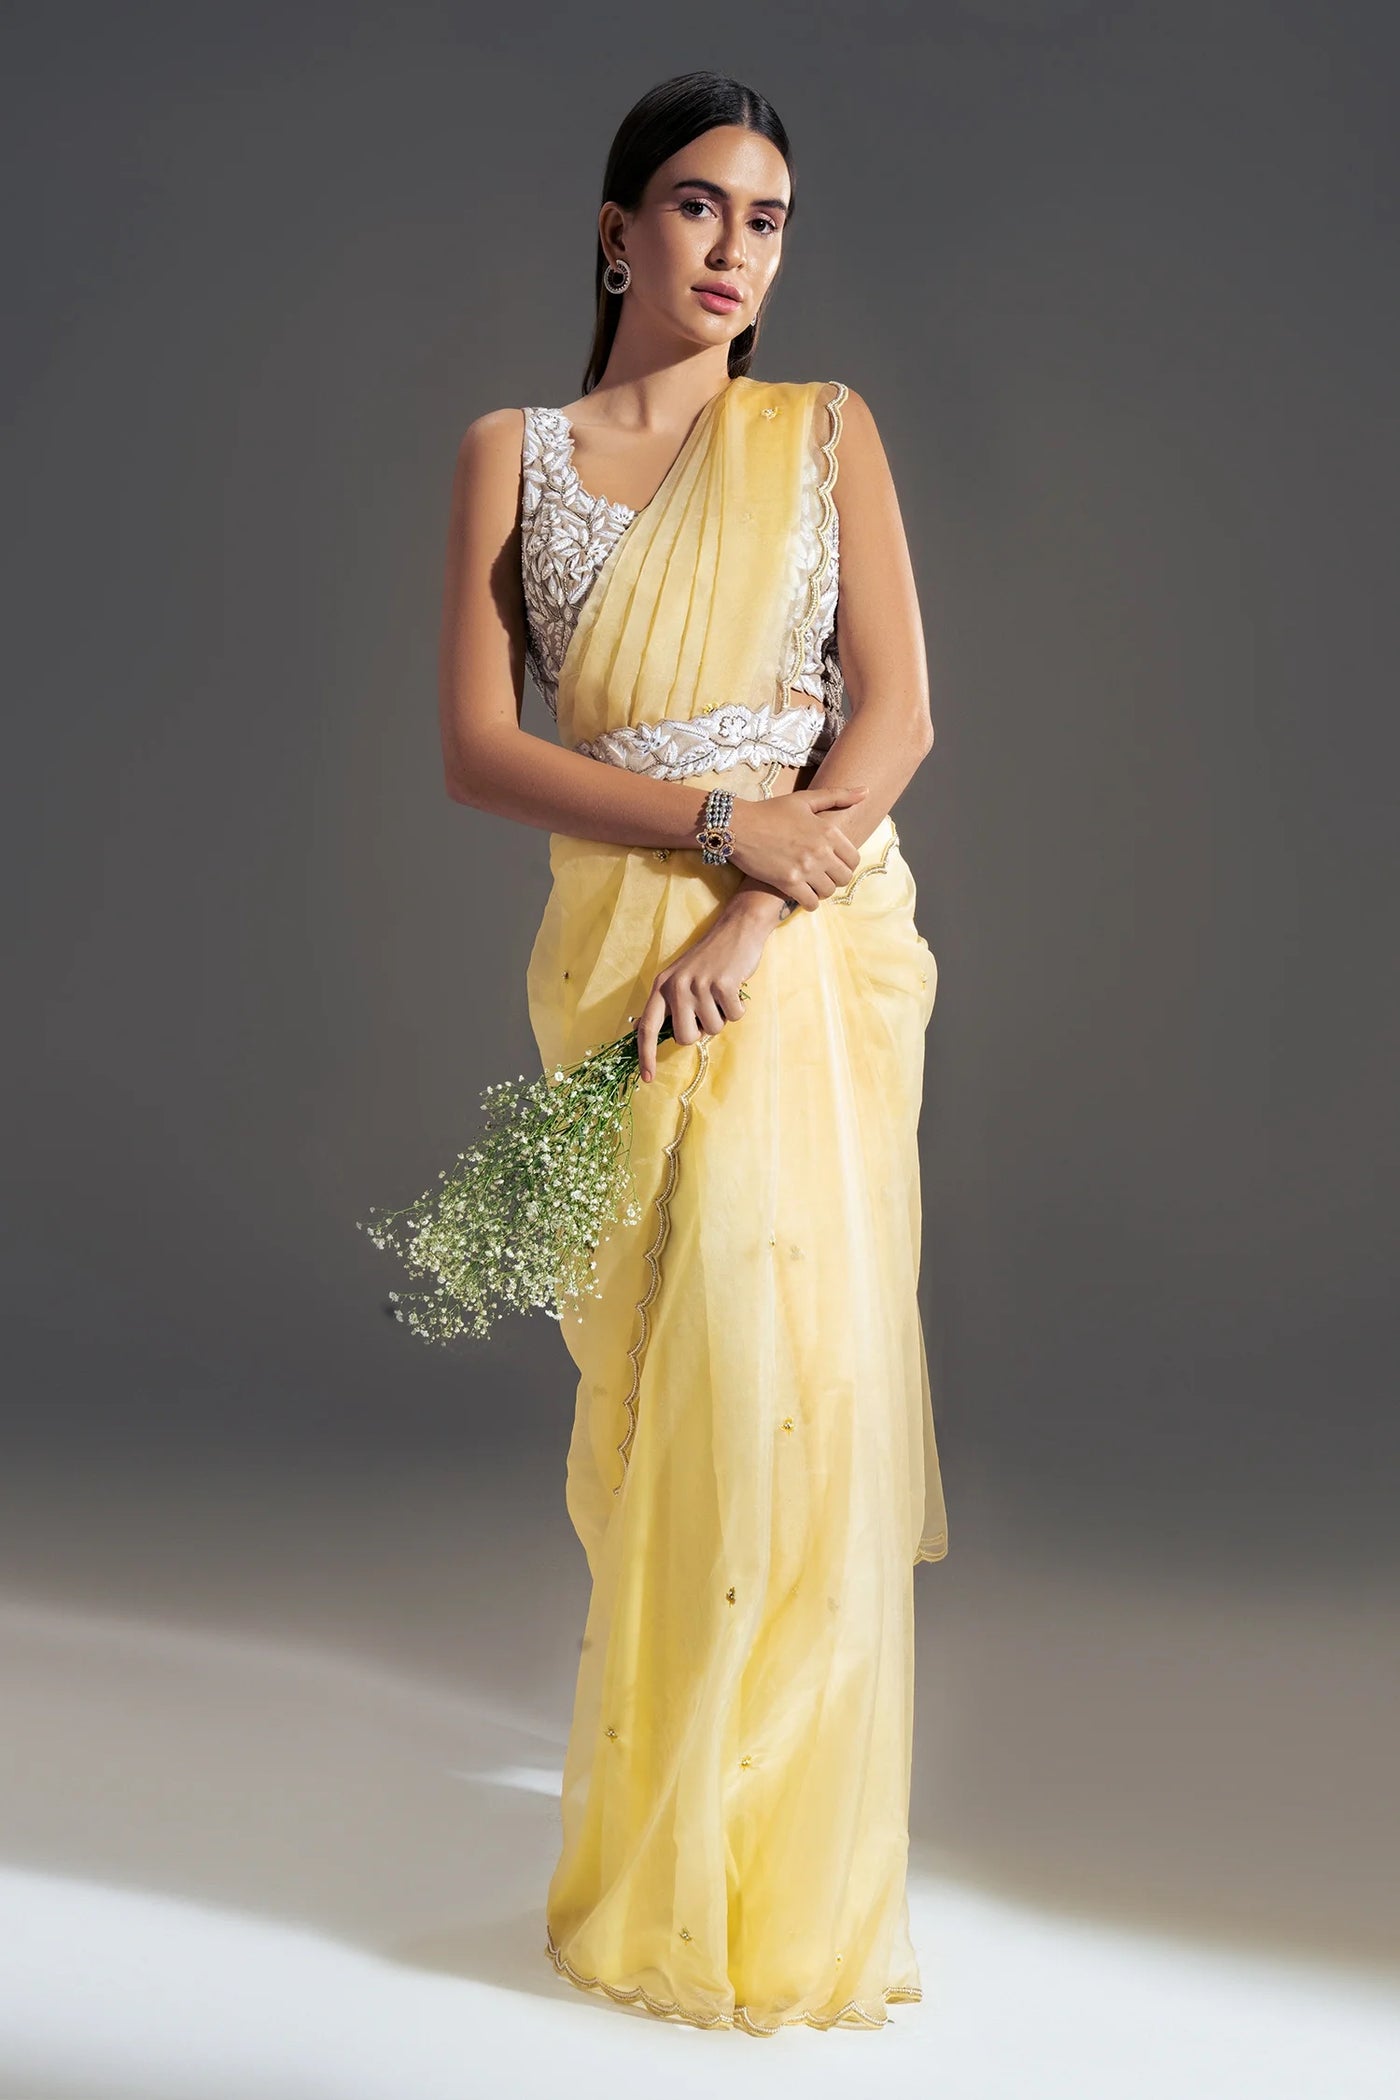 Yellow Suede Scallop Saree - Indian Clothing in Denver, CO, Aurora, CO, Boulder, CO, Fort Collins, CO, Colorado Springs, CO, Parker, CO, Highlands Ranch, CO, Cherry Creek, CO, Centennial, CO, and Longmont, CO. Nationwide shipping USA - India Fashion X